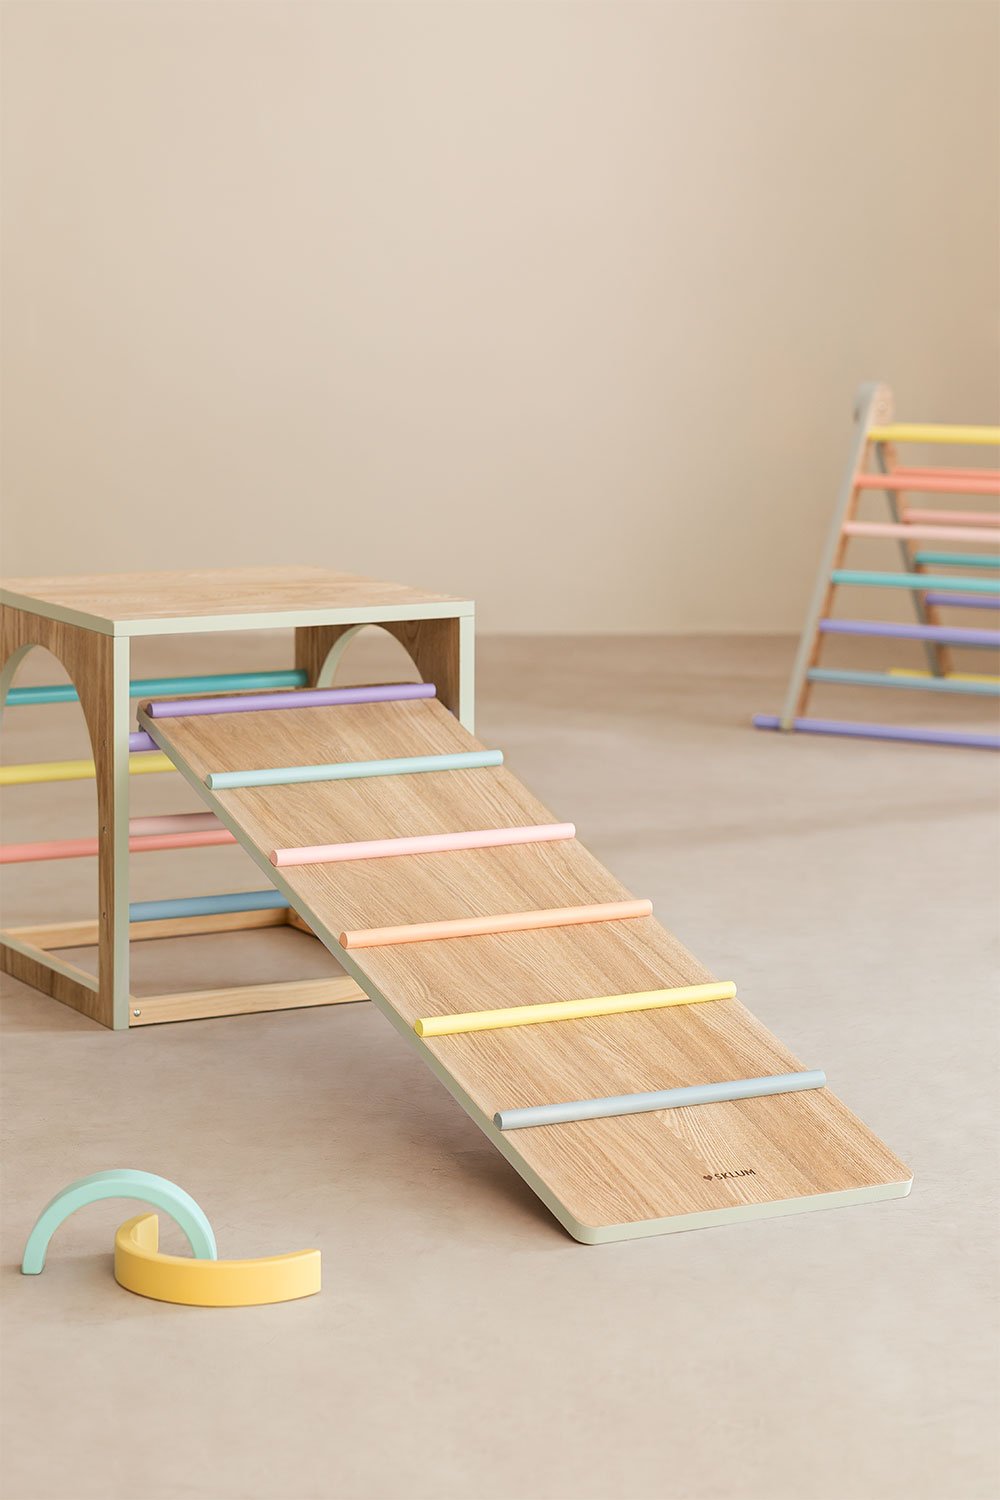 Learning Ladder Ramp Pyqer Colors Kids, gallery image 1